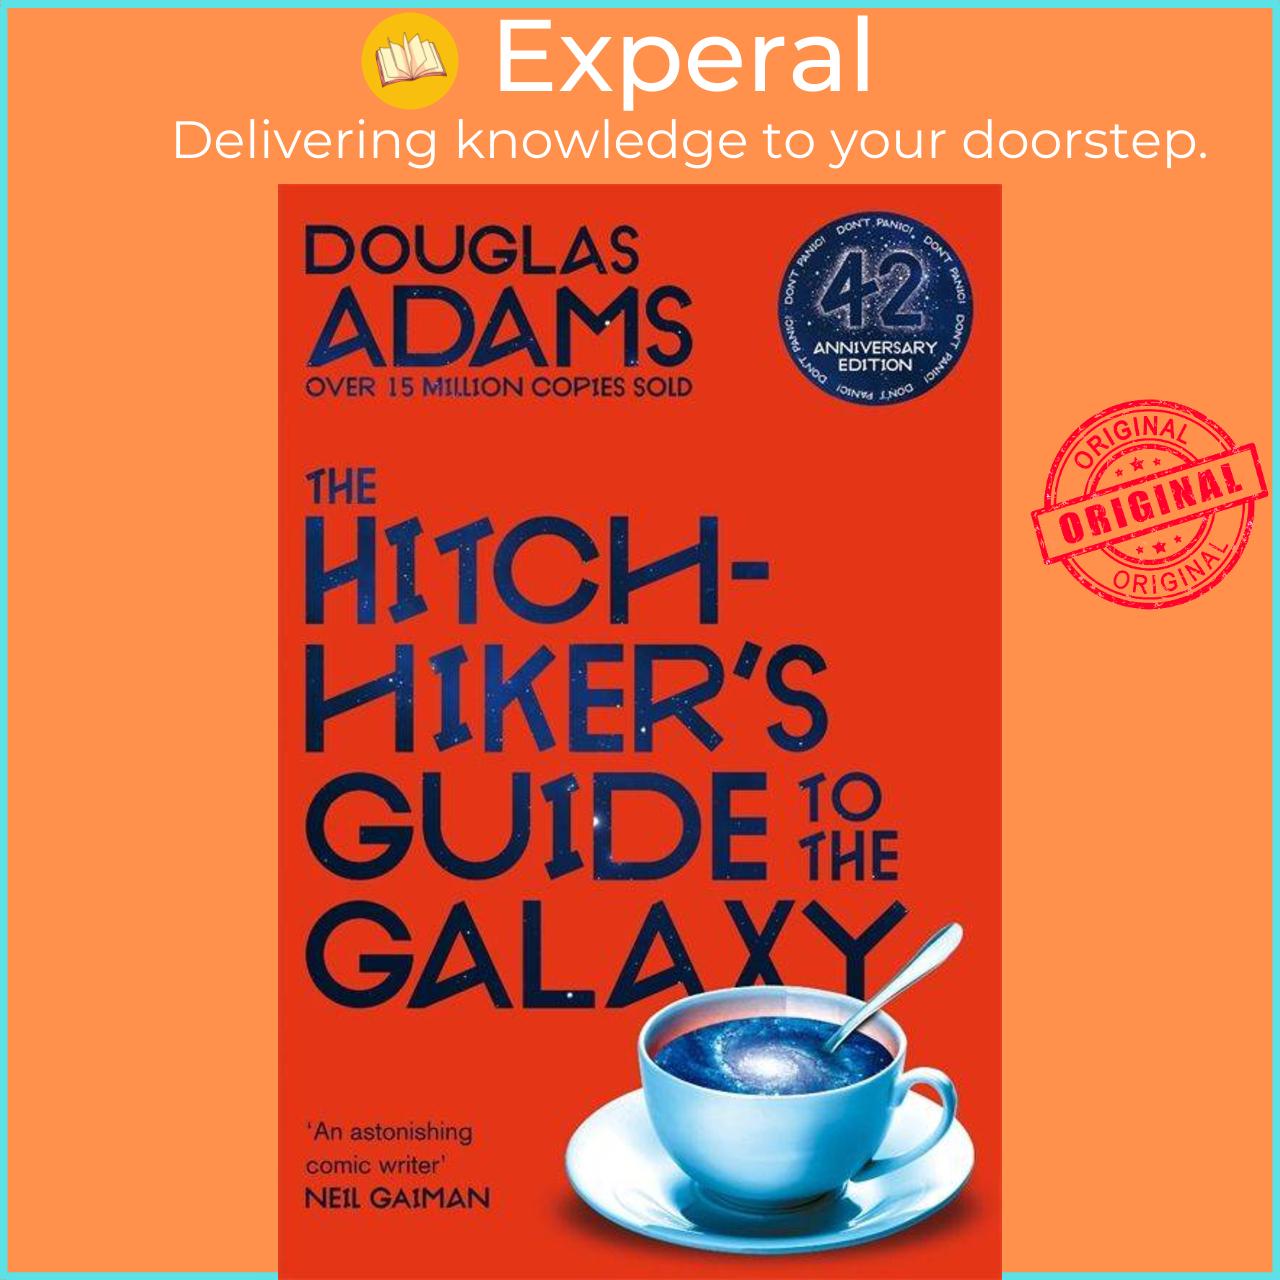 Sách - The Hitchhiker's Guide to the Galaxy - 42nd Anniversary Edition by Douglas Adams (UK edition, paperback)